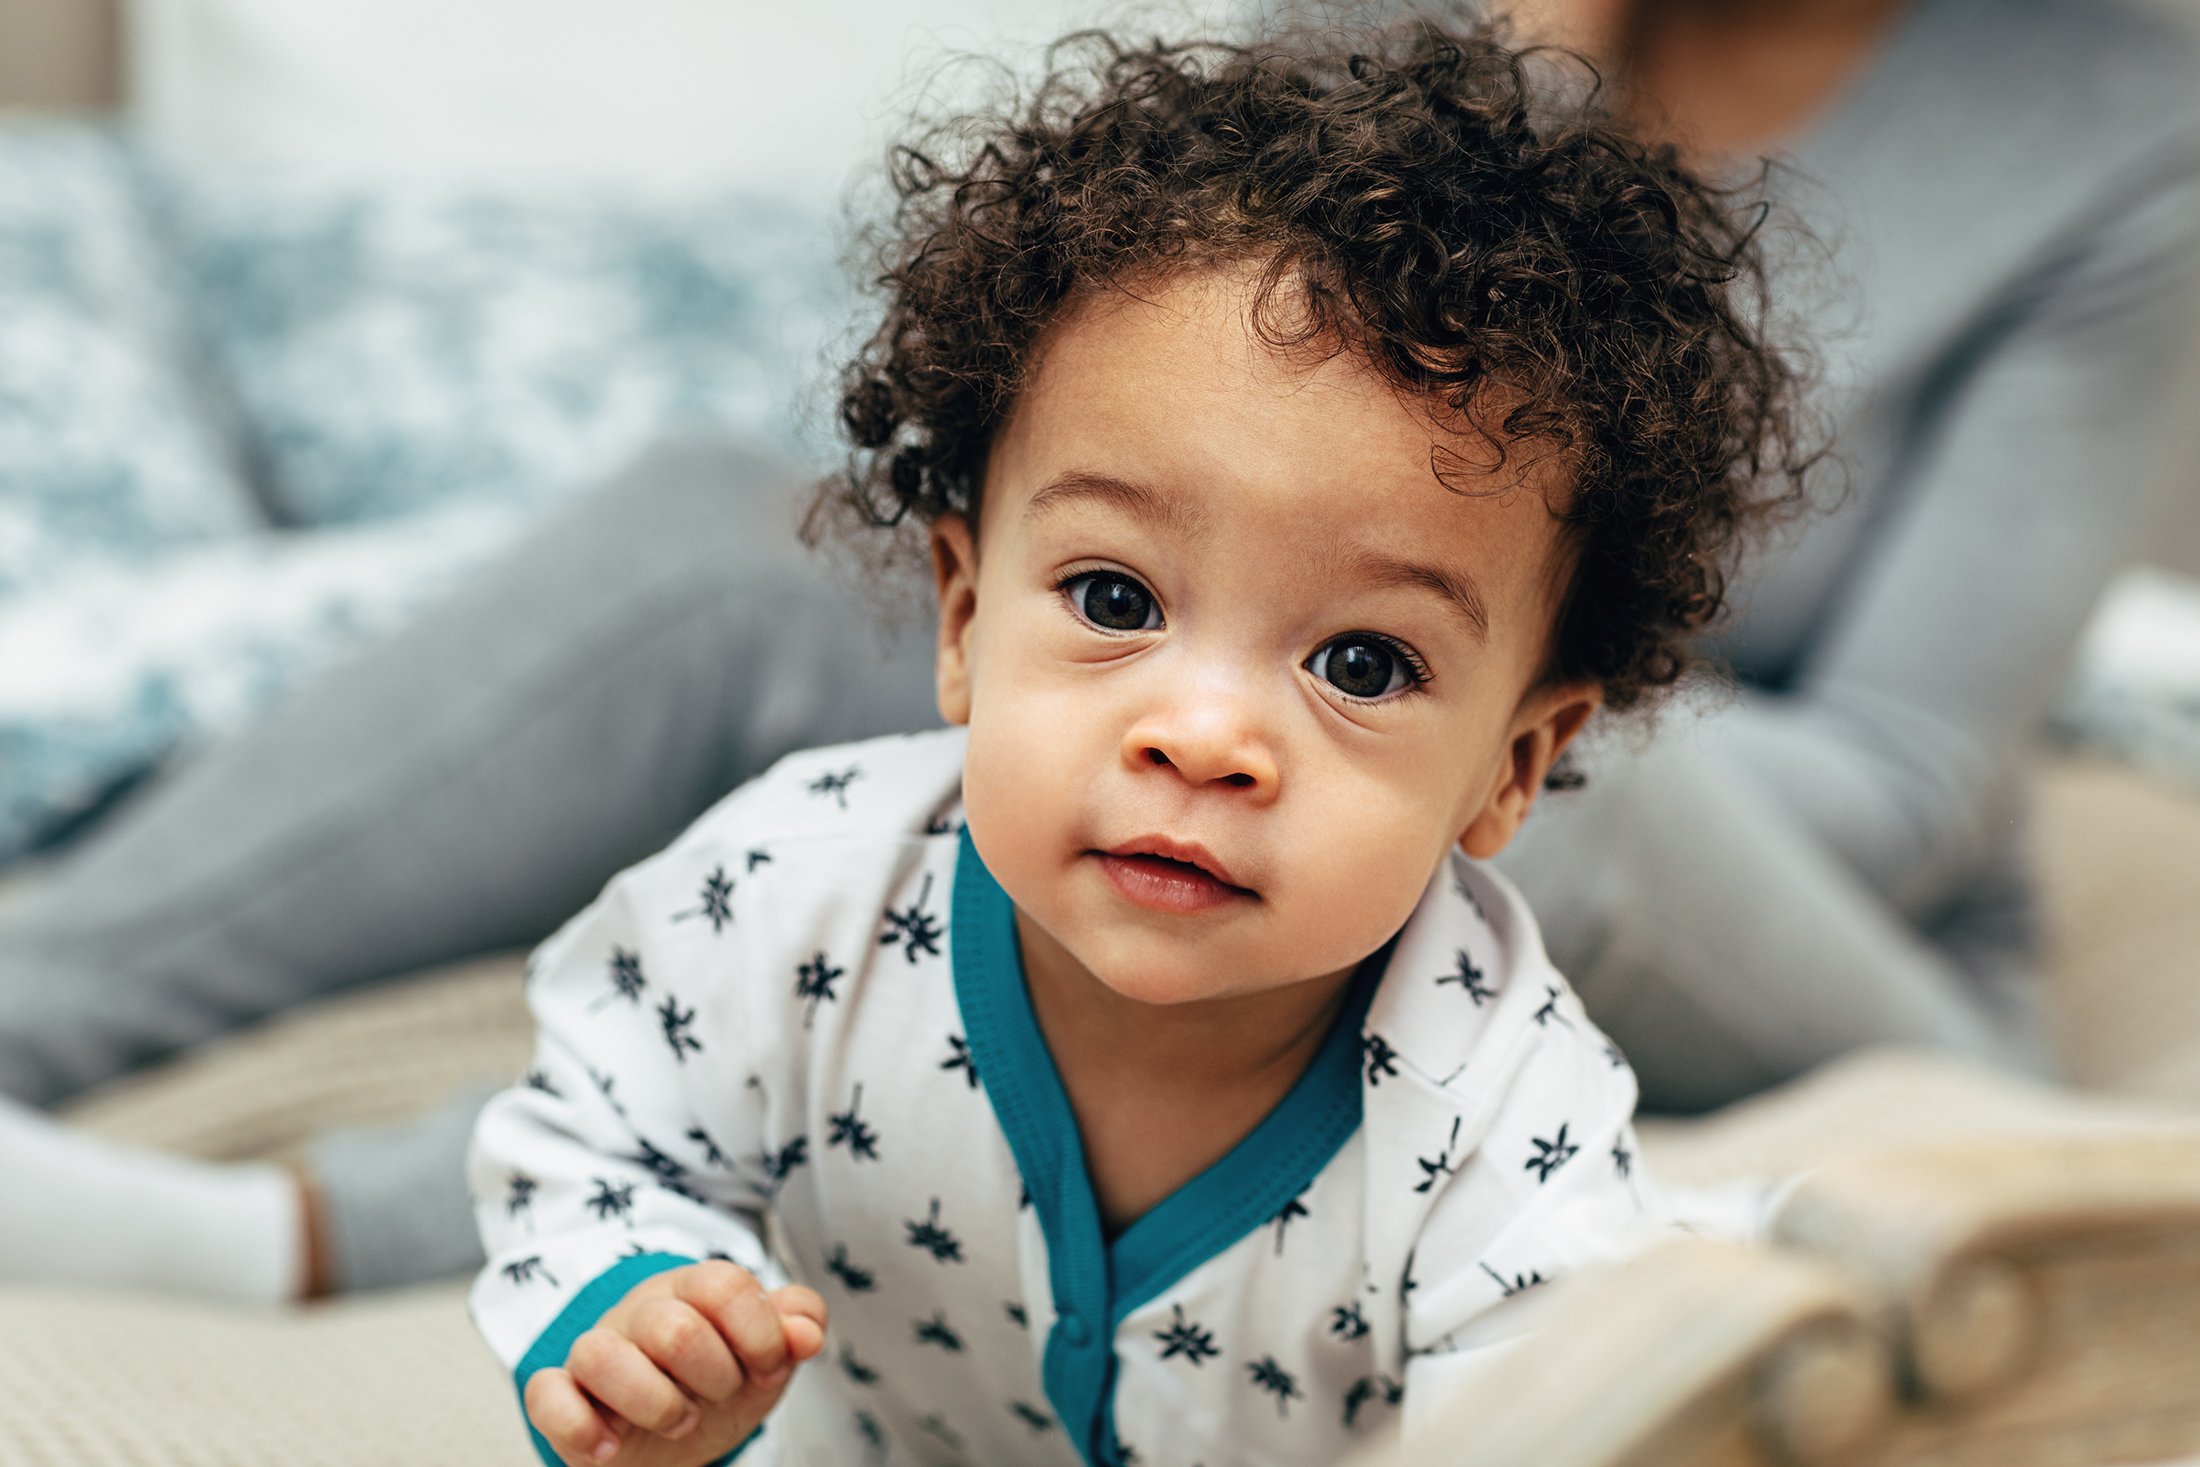 Close-up portrait of a curly-haired baby boy crawling on a bed.